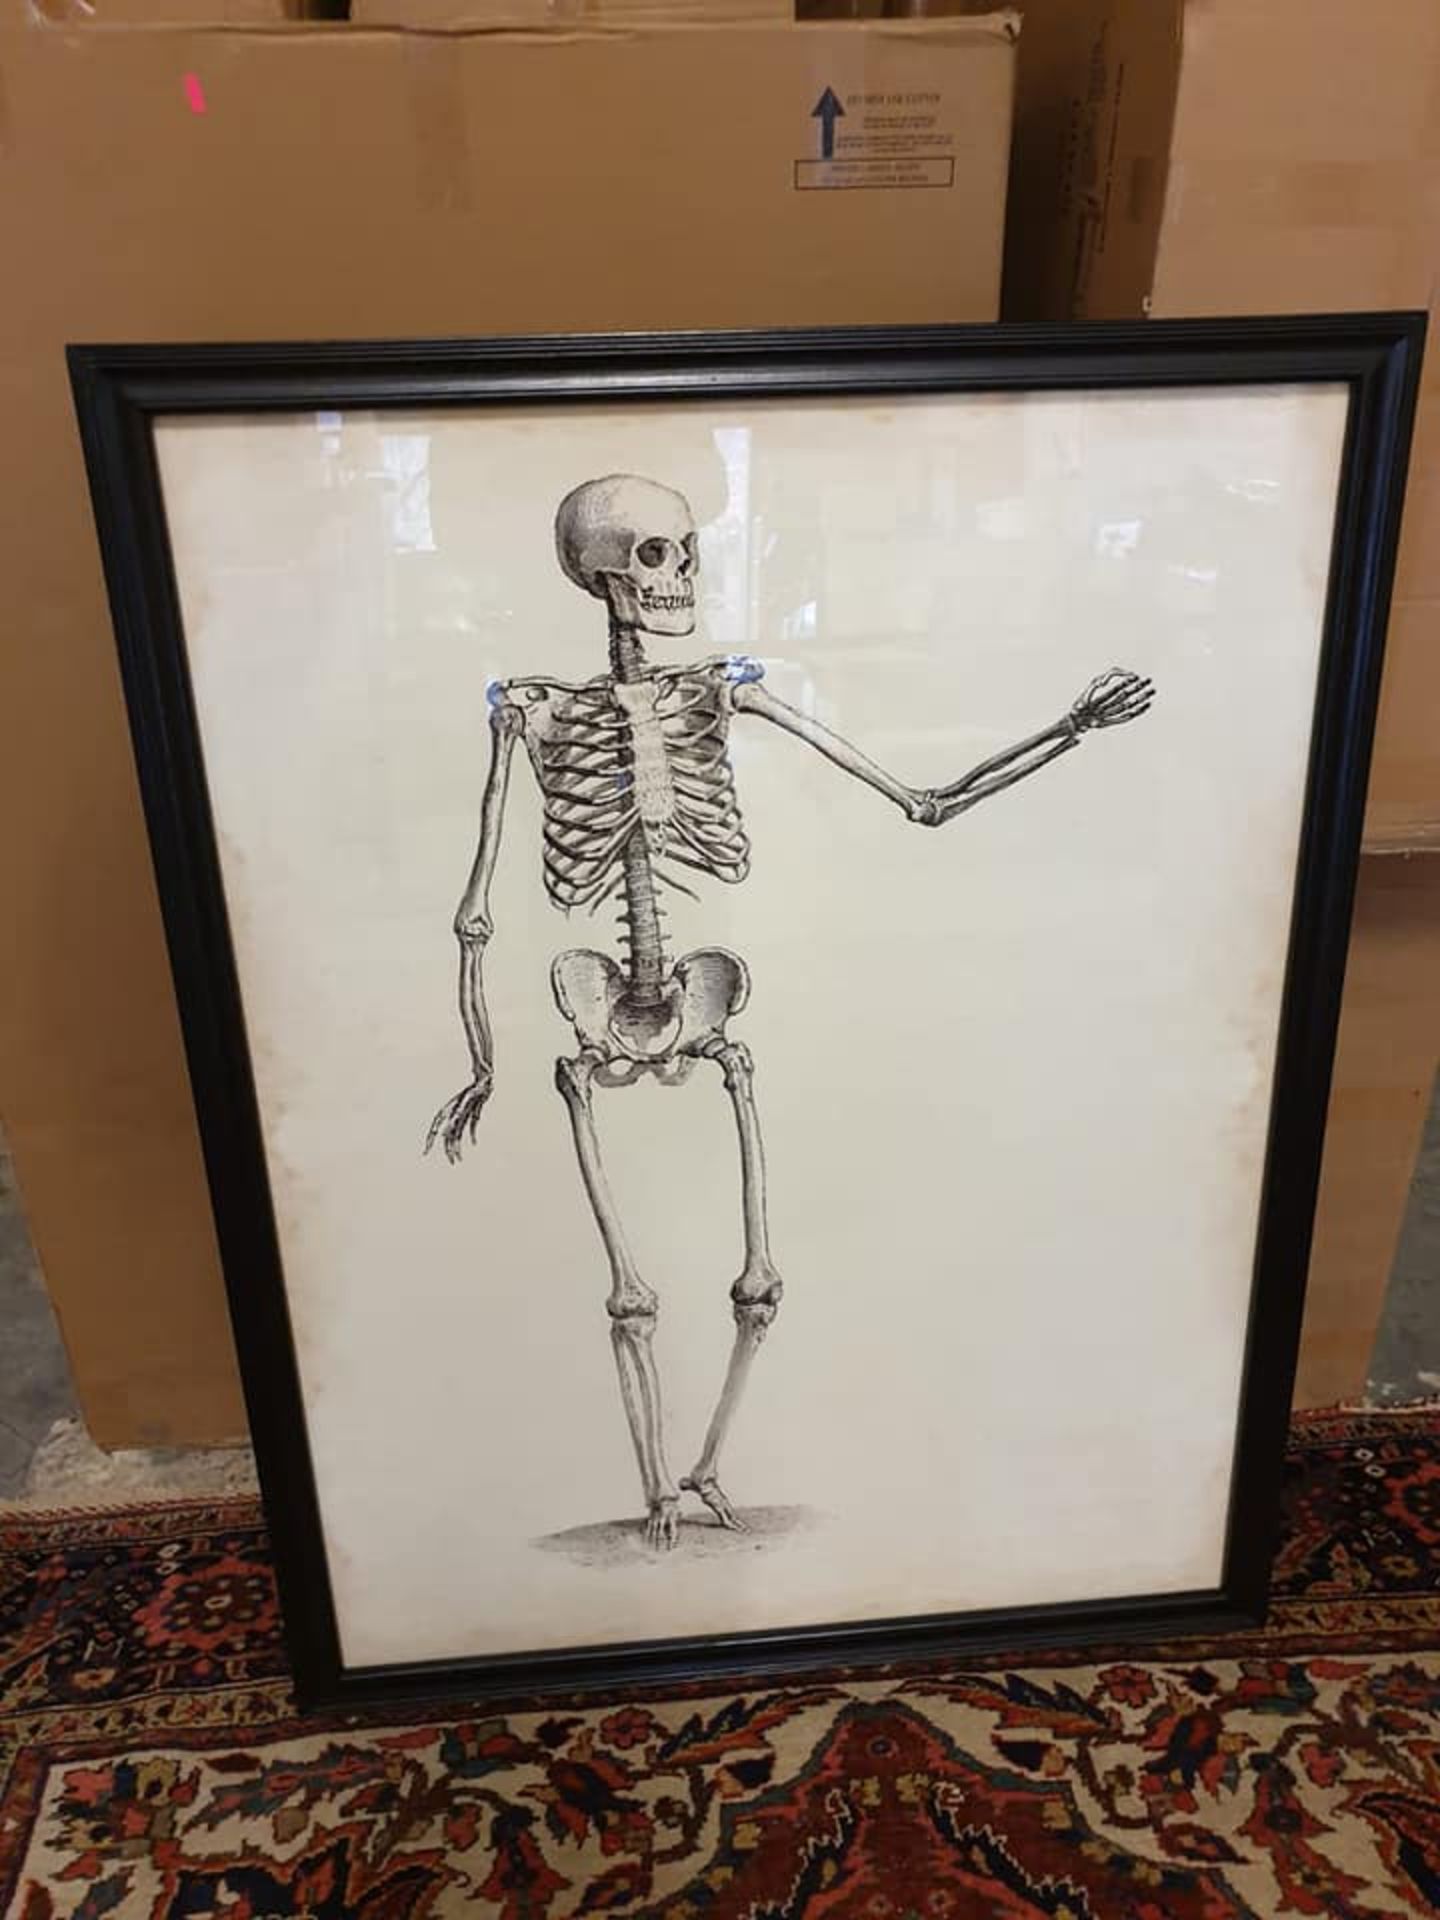 Timothy Oulton Skeleton Wall Art This cheeky skeleton is taken from an early 18th century